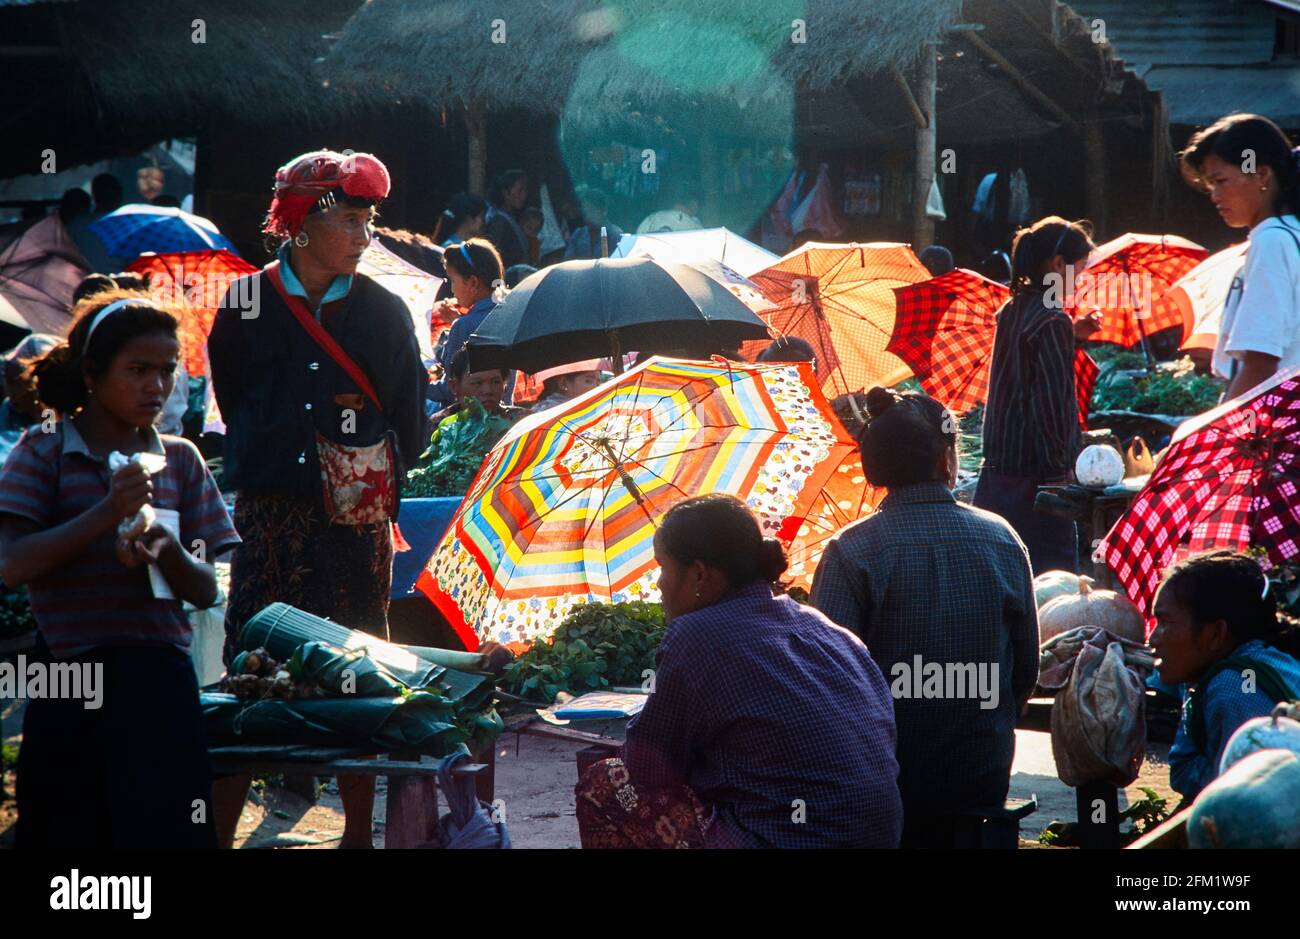 Market day in Luang Namtha. Well shielded, the women sell vegetables and herbs. Under the protective umbrellas in quieter corners of the market, opium Stock Photo